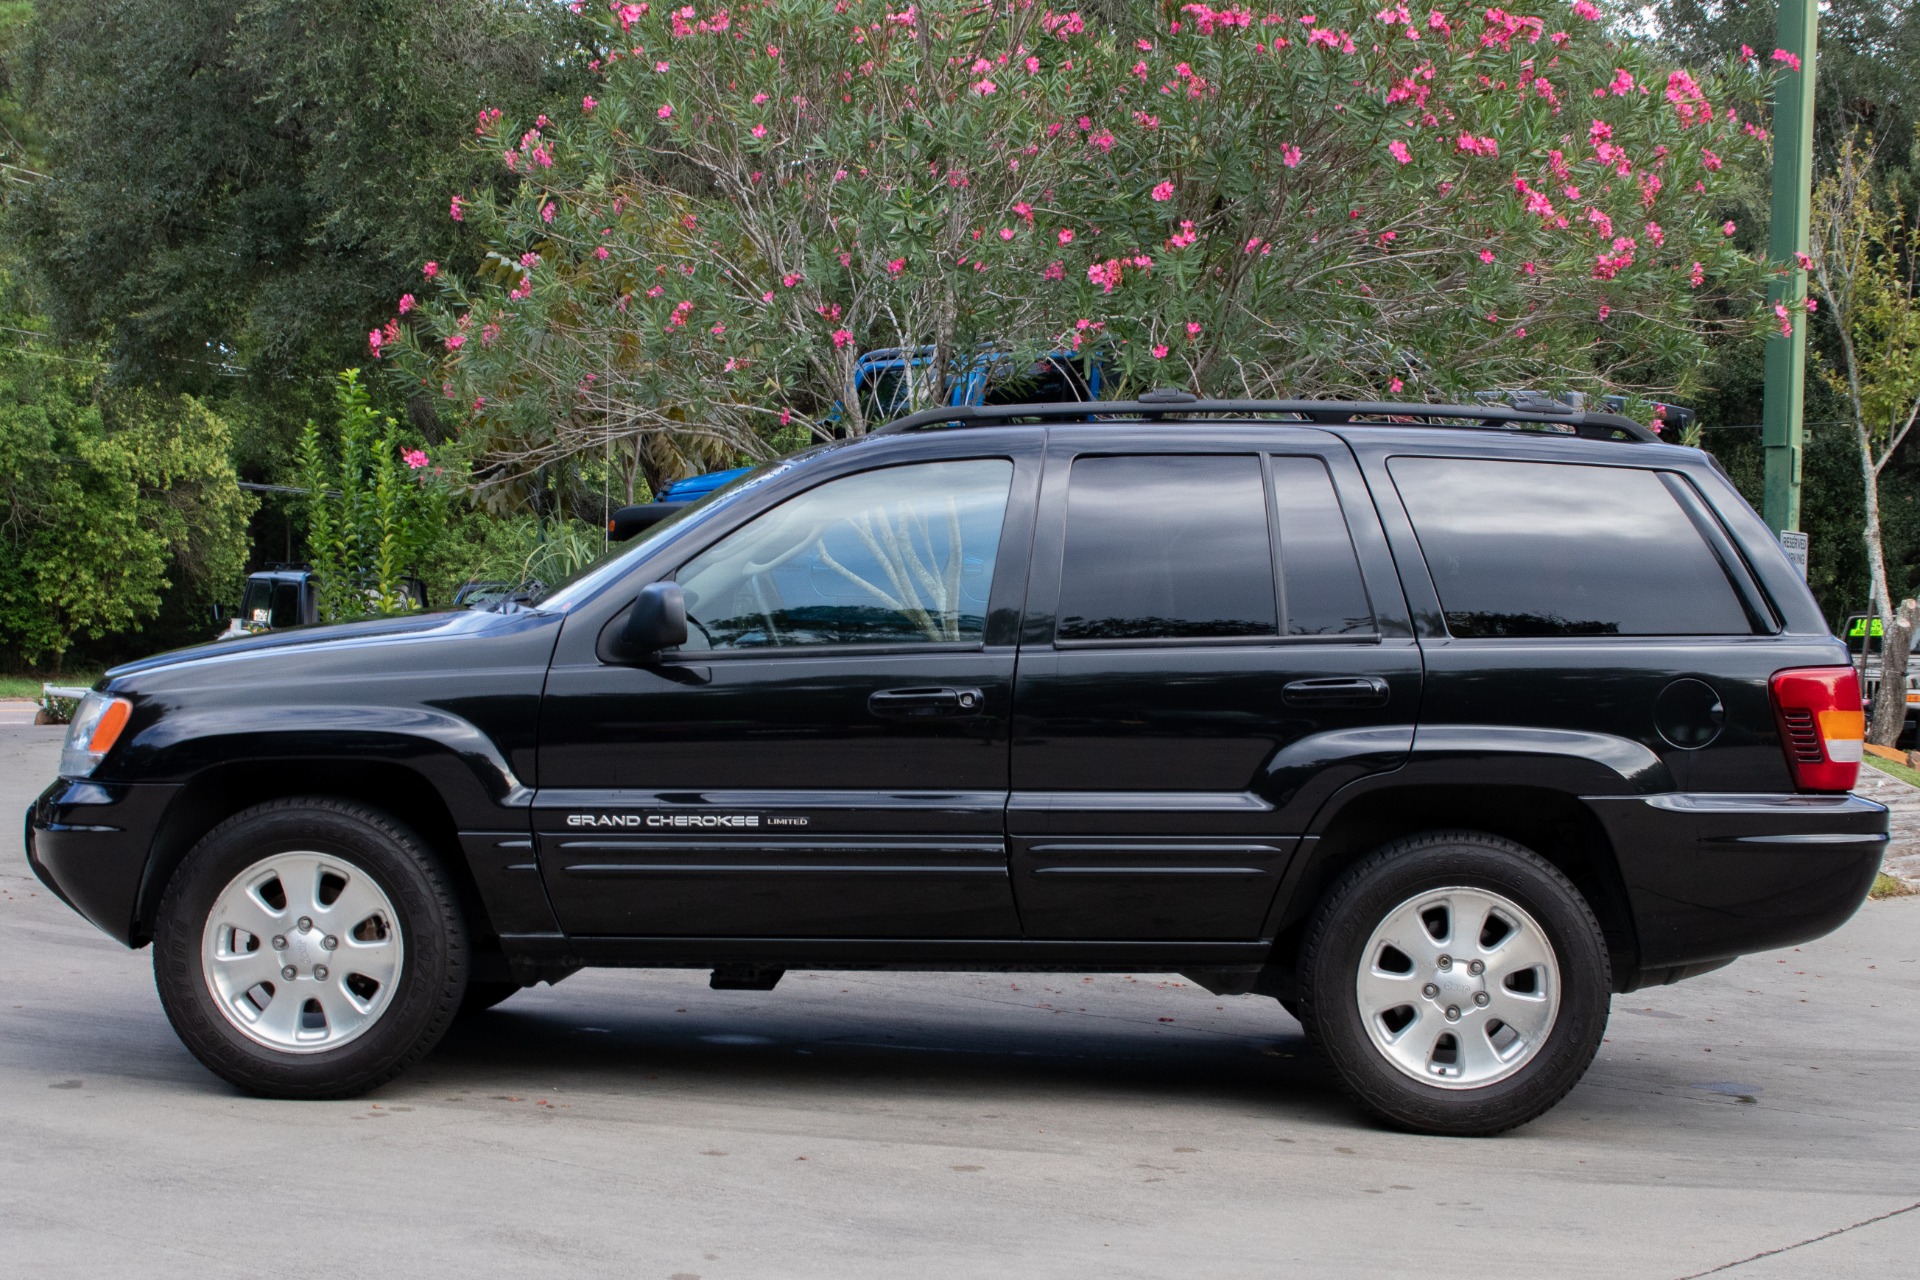 Used 2004 Jeep Grand Cherokee 4dr Limited For Sale (7,995